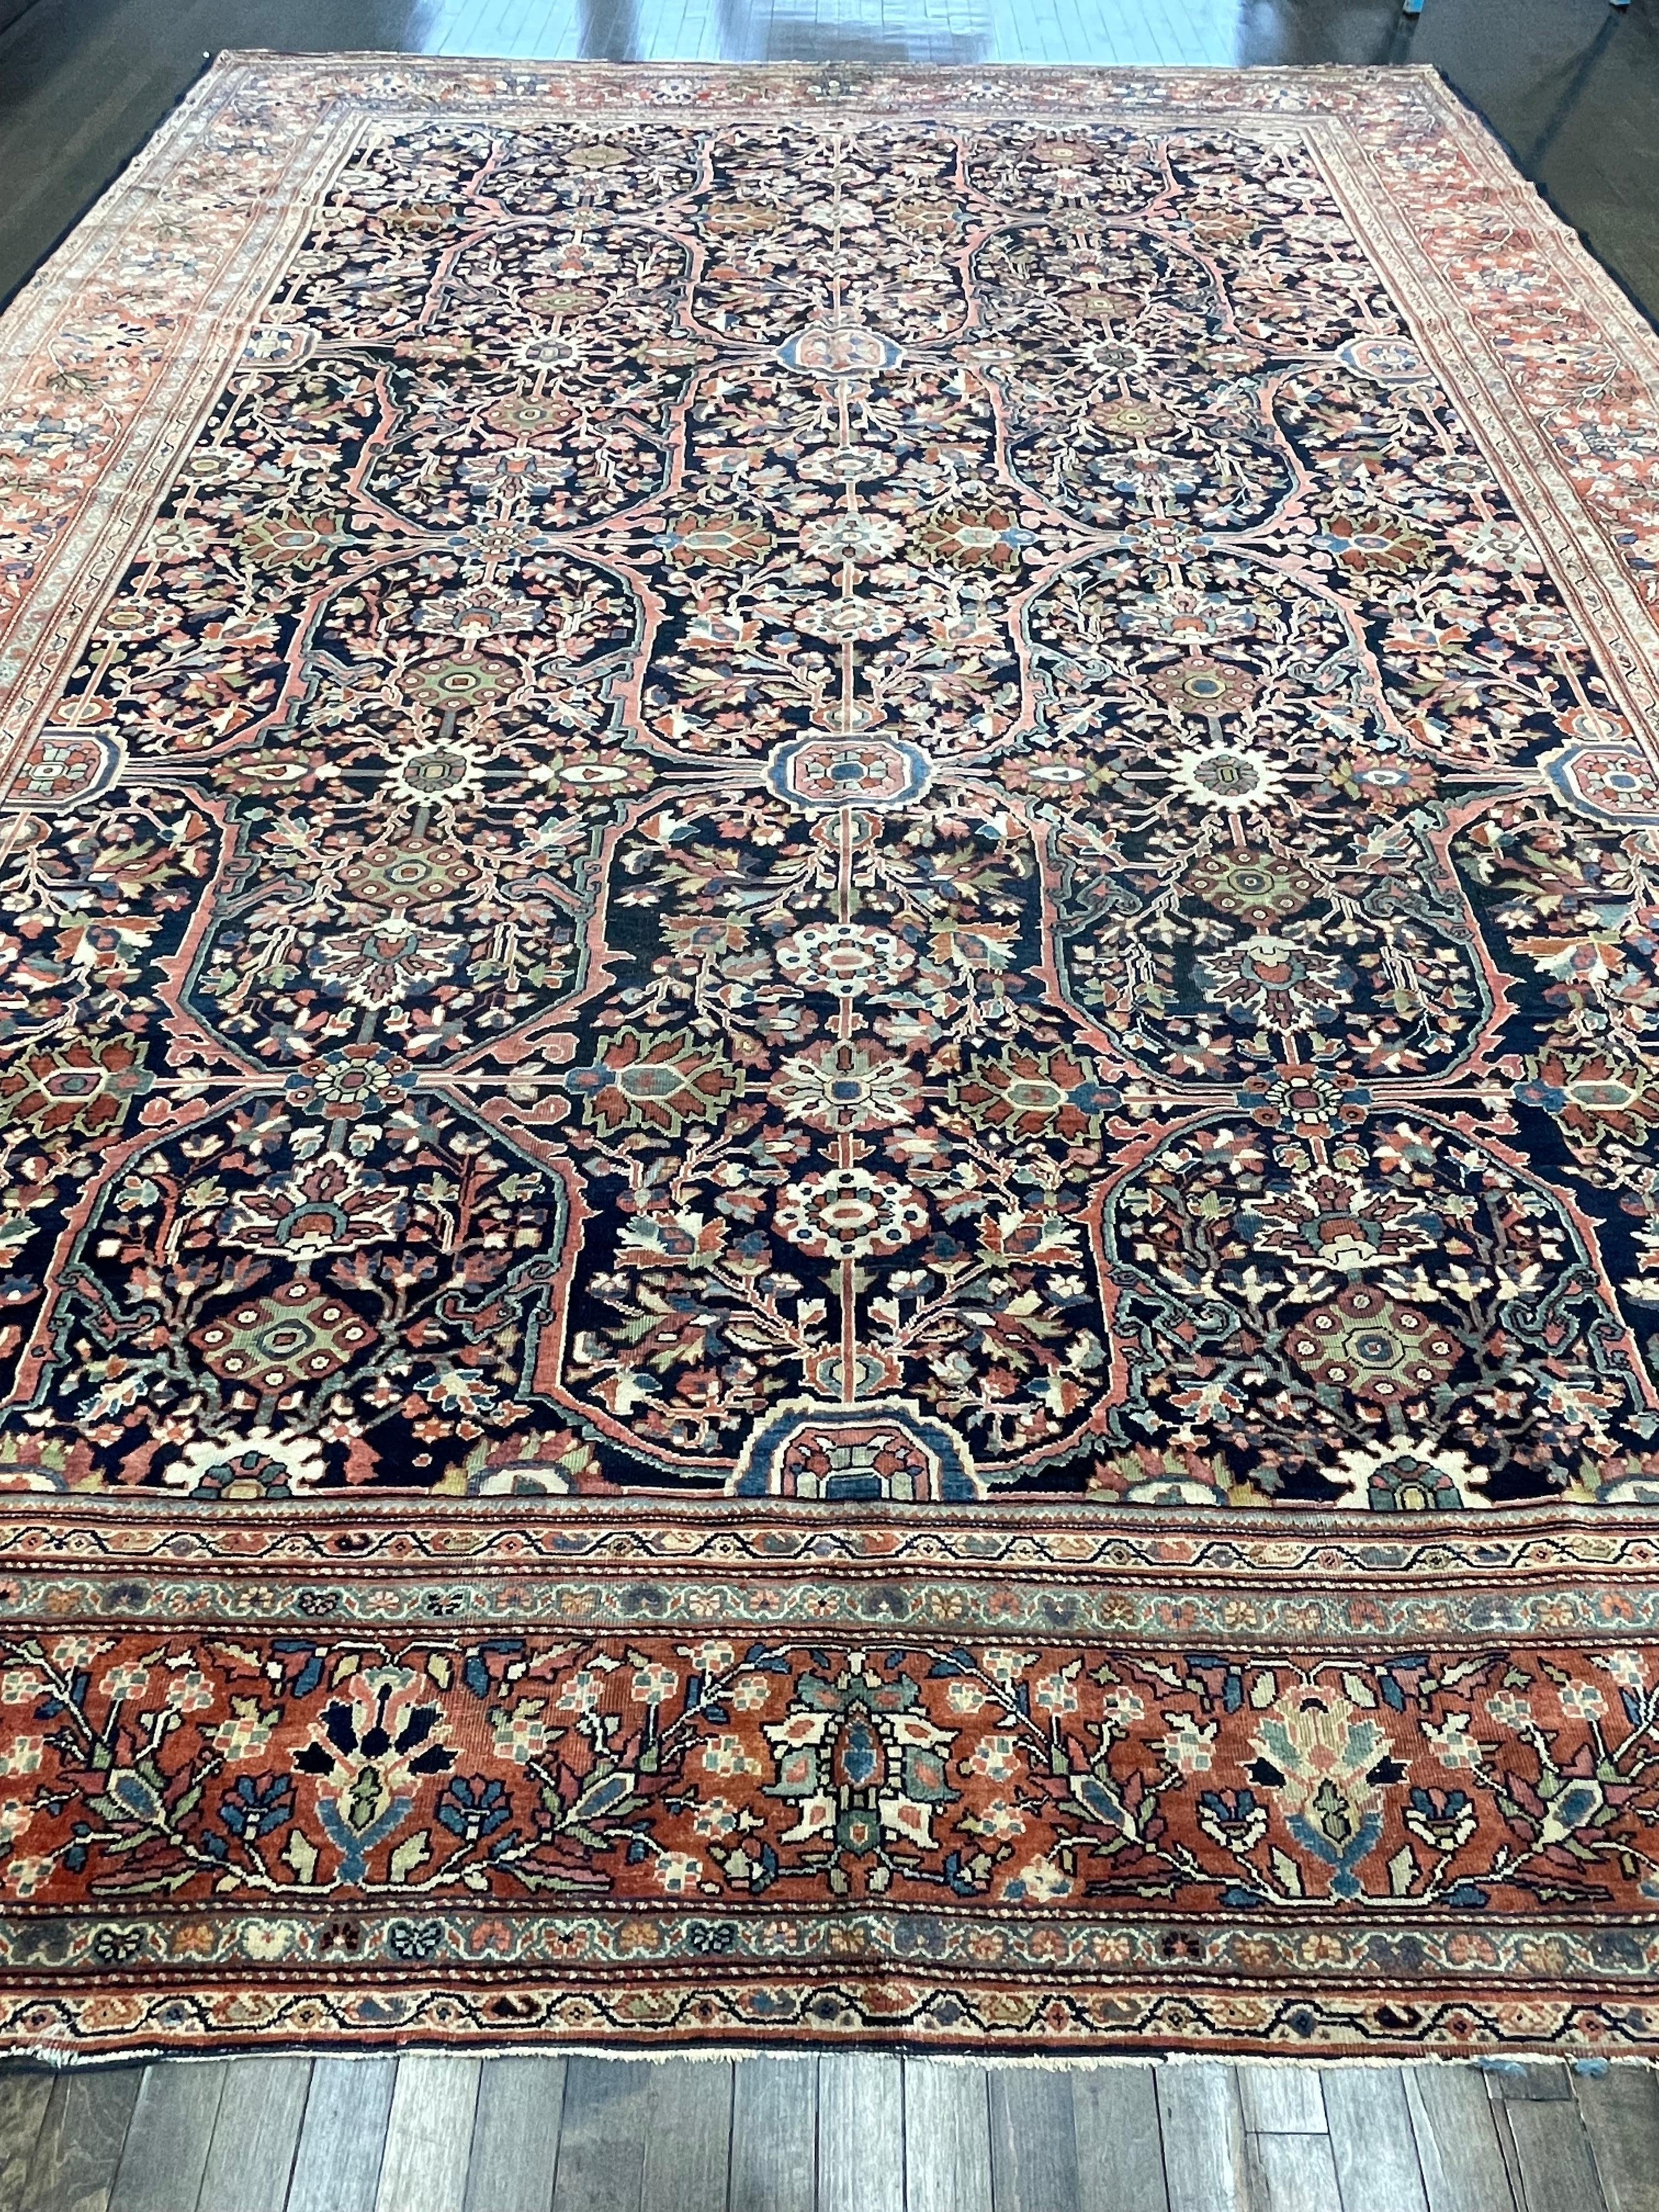 Tightly hand knotted, this carpet is made in the town of Farahan in west Persia. Farahan rugs are made with hard wool and clipped very flat. The restrained style of decoration is almost gothic in character. The foundation is strong, often rather